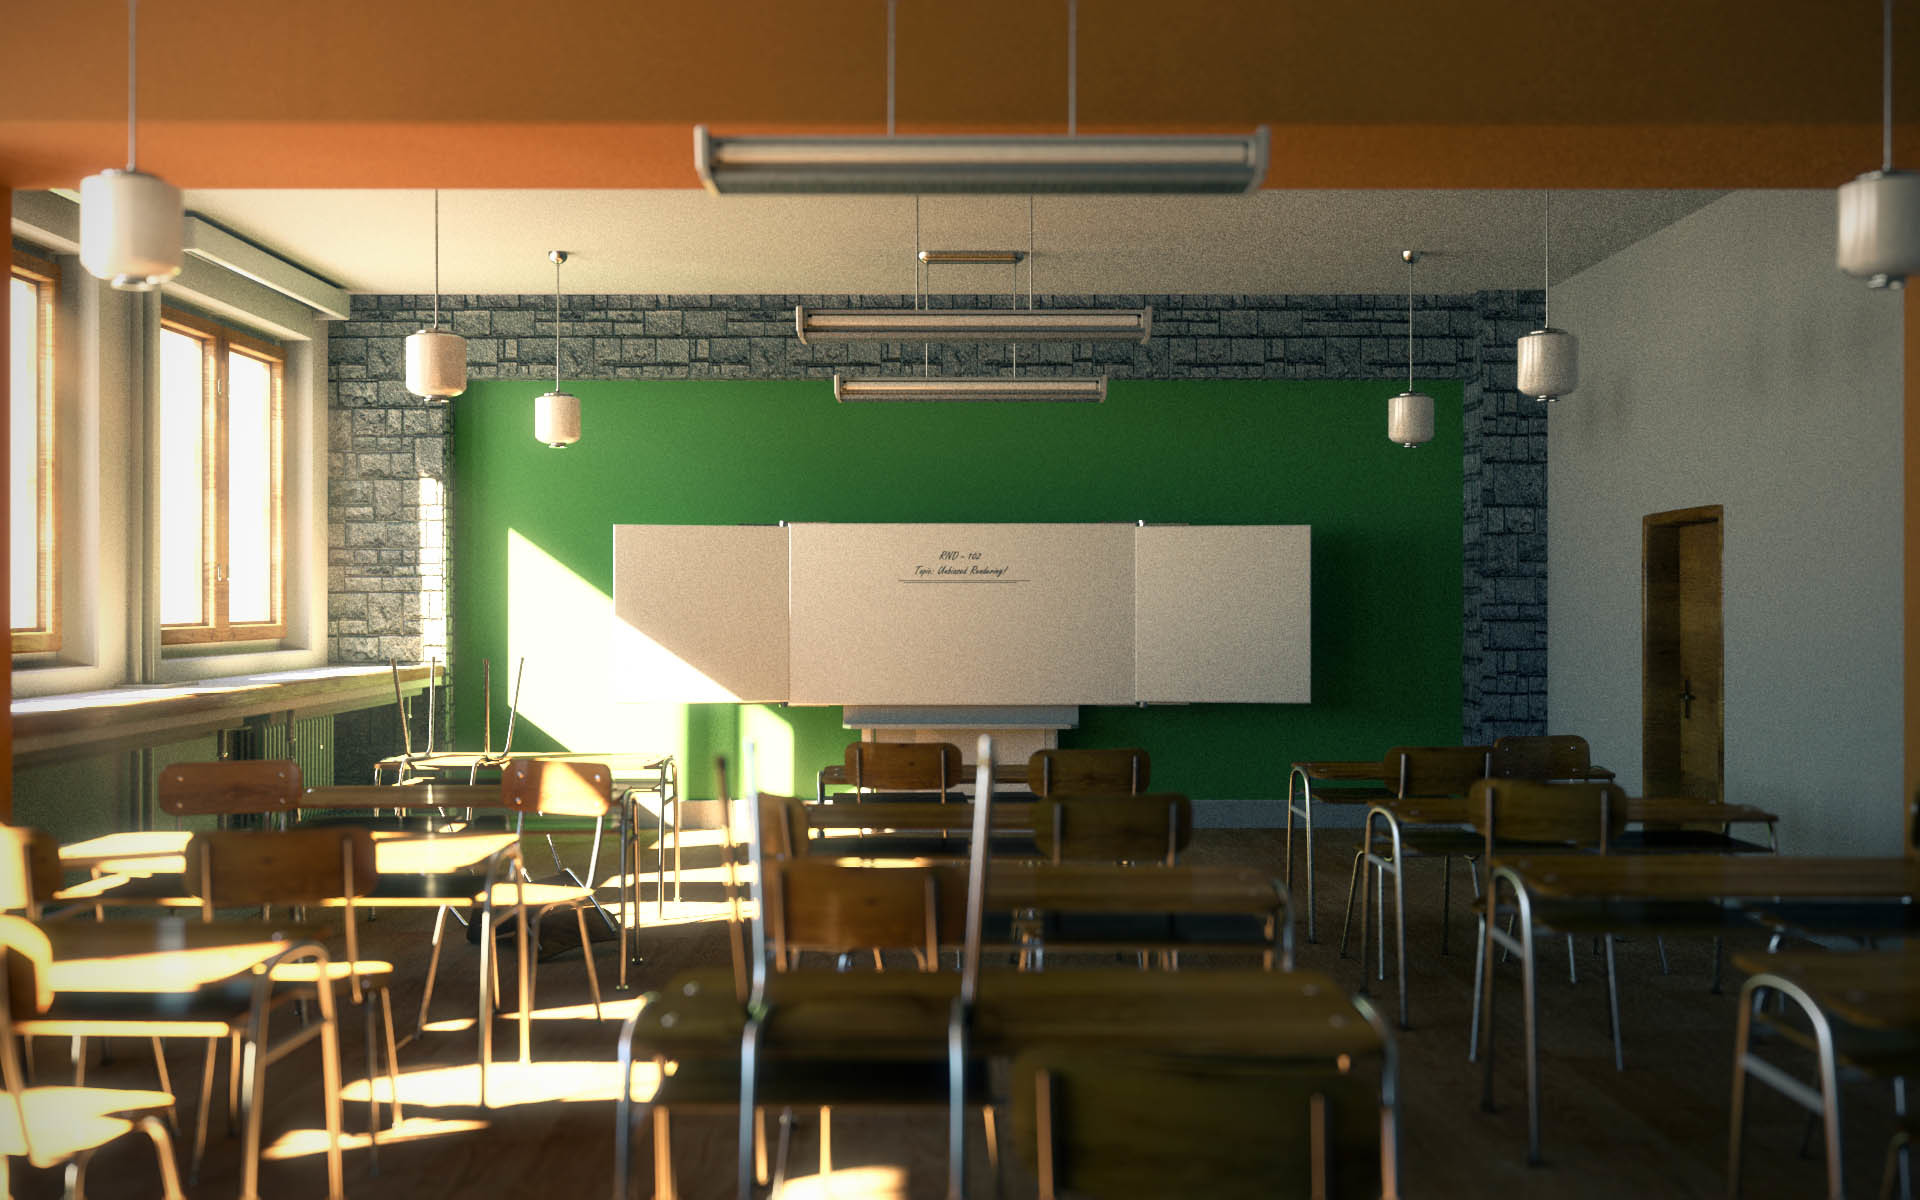 1920x1200 ... Evermotion Classroom Render by Alavi-TheArtist